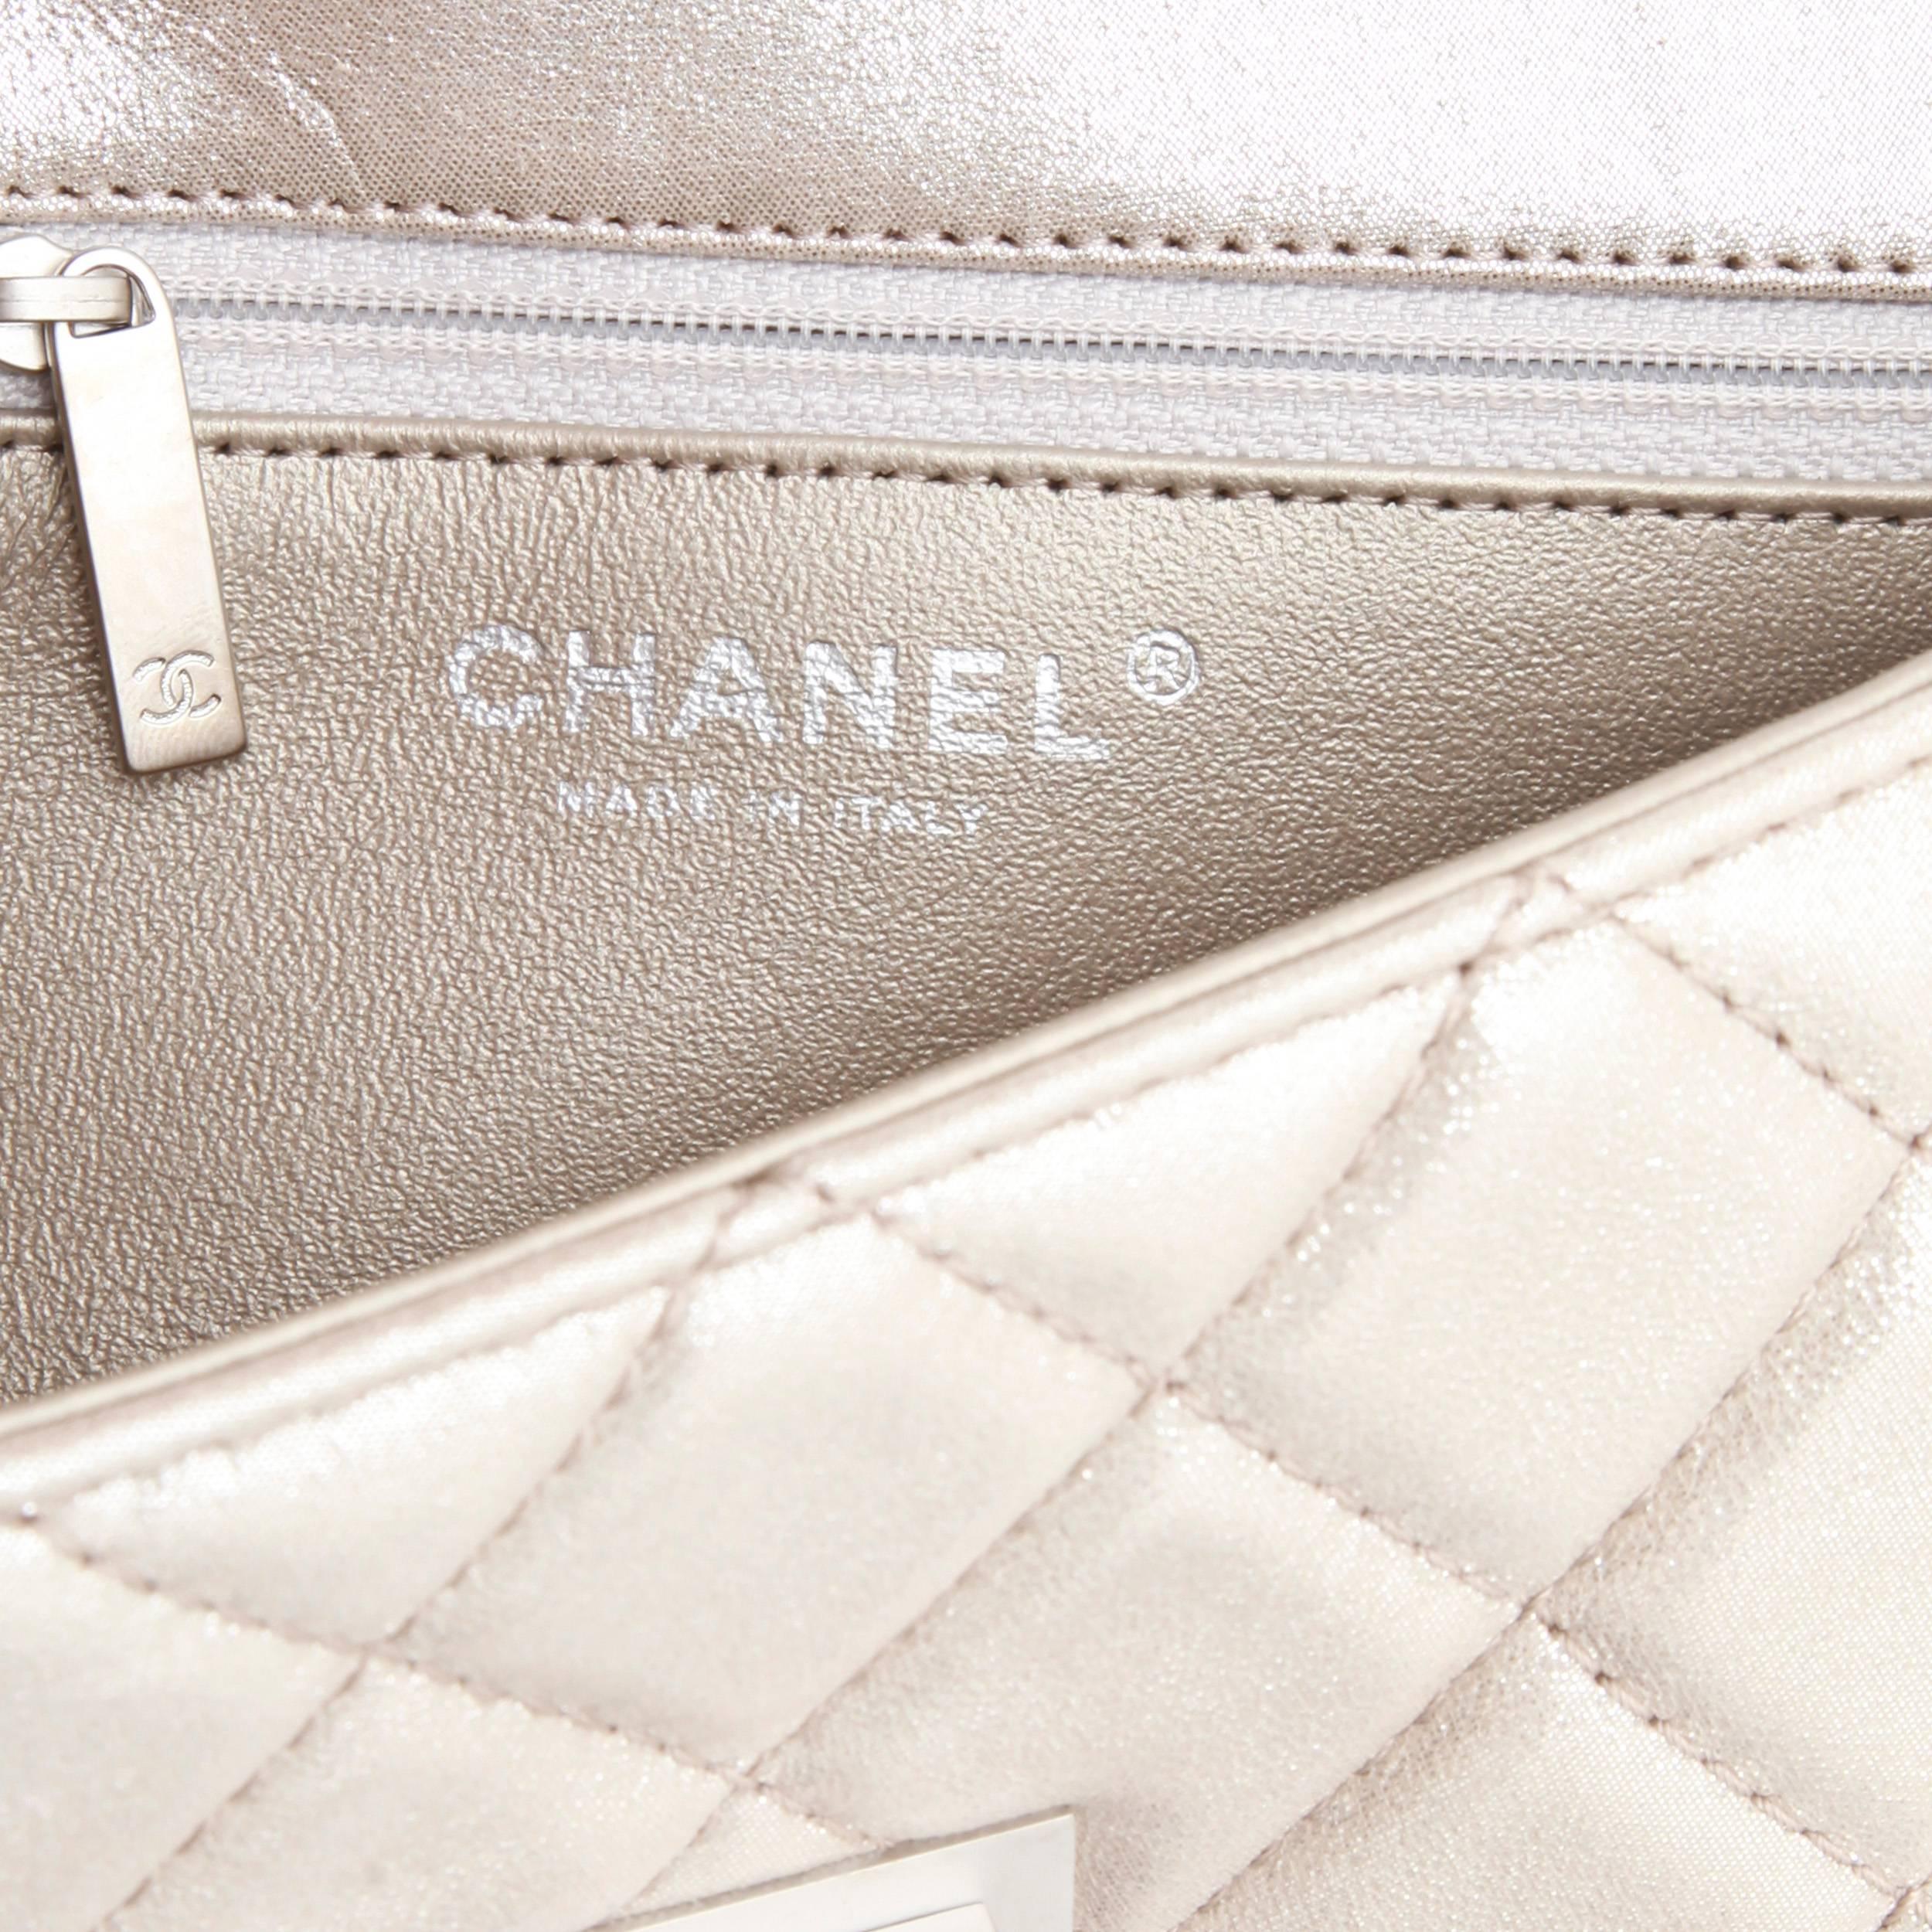 CHANEL Evening Bag in Light Iridescent Silver Lamé Leather 4